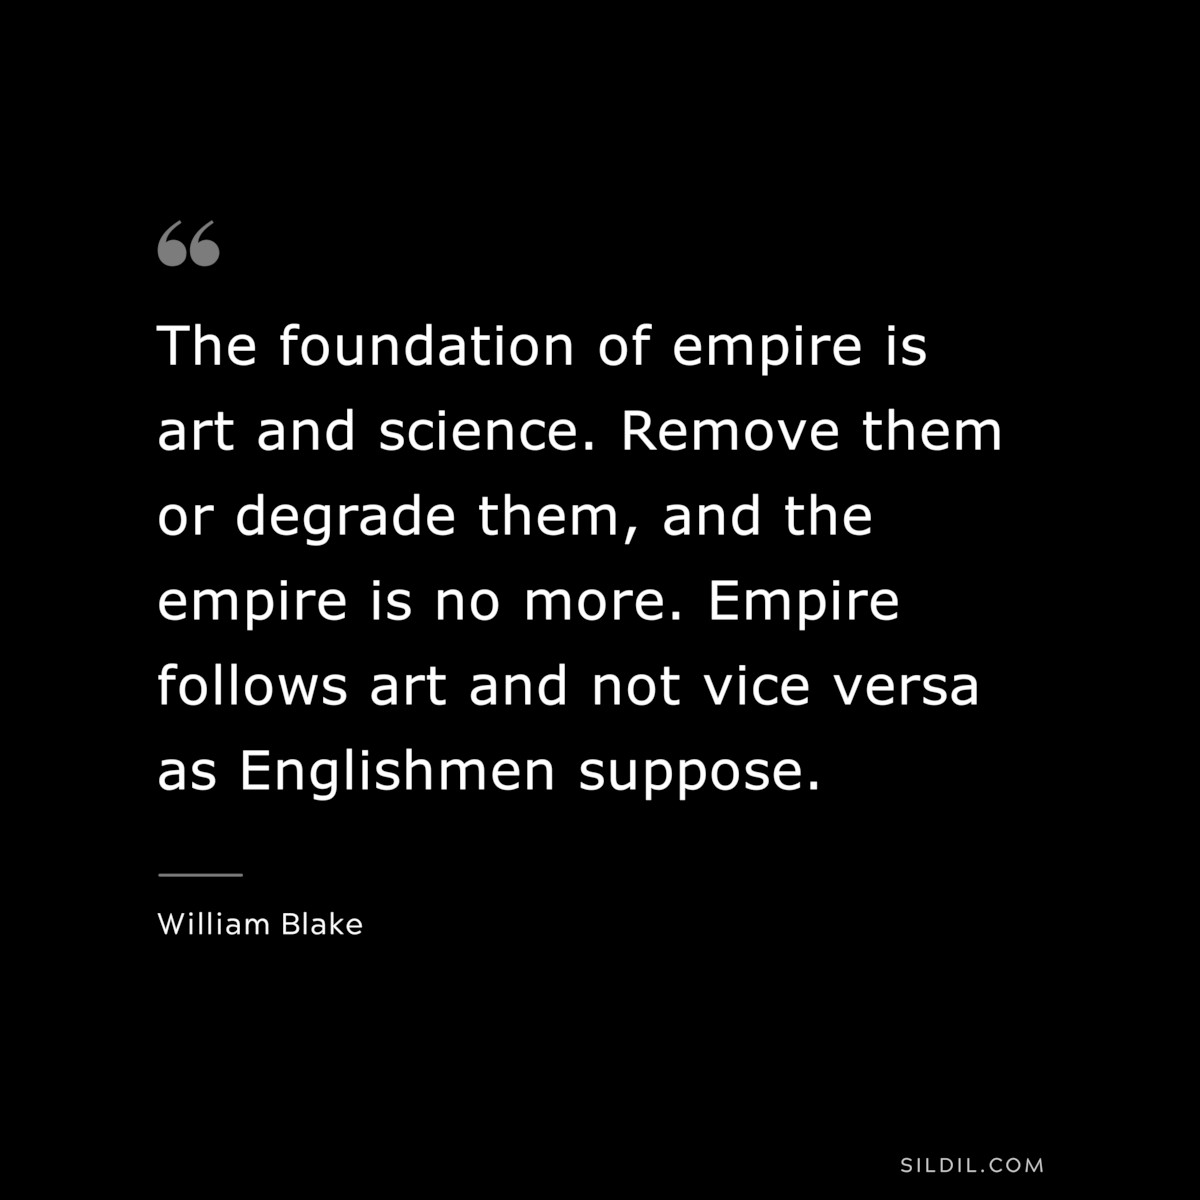 The foundation of empire is art and science. Remove them or degrade them, and the empire is no more. Empire follows art and not vice versa as Englishmen suppose. ― William Blake